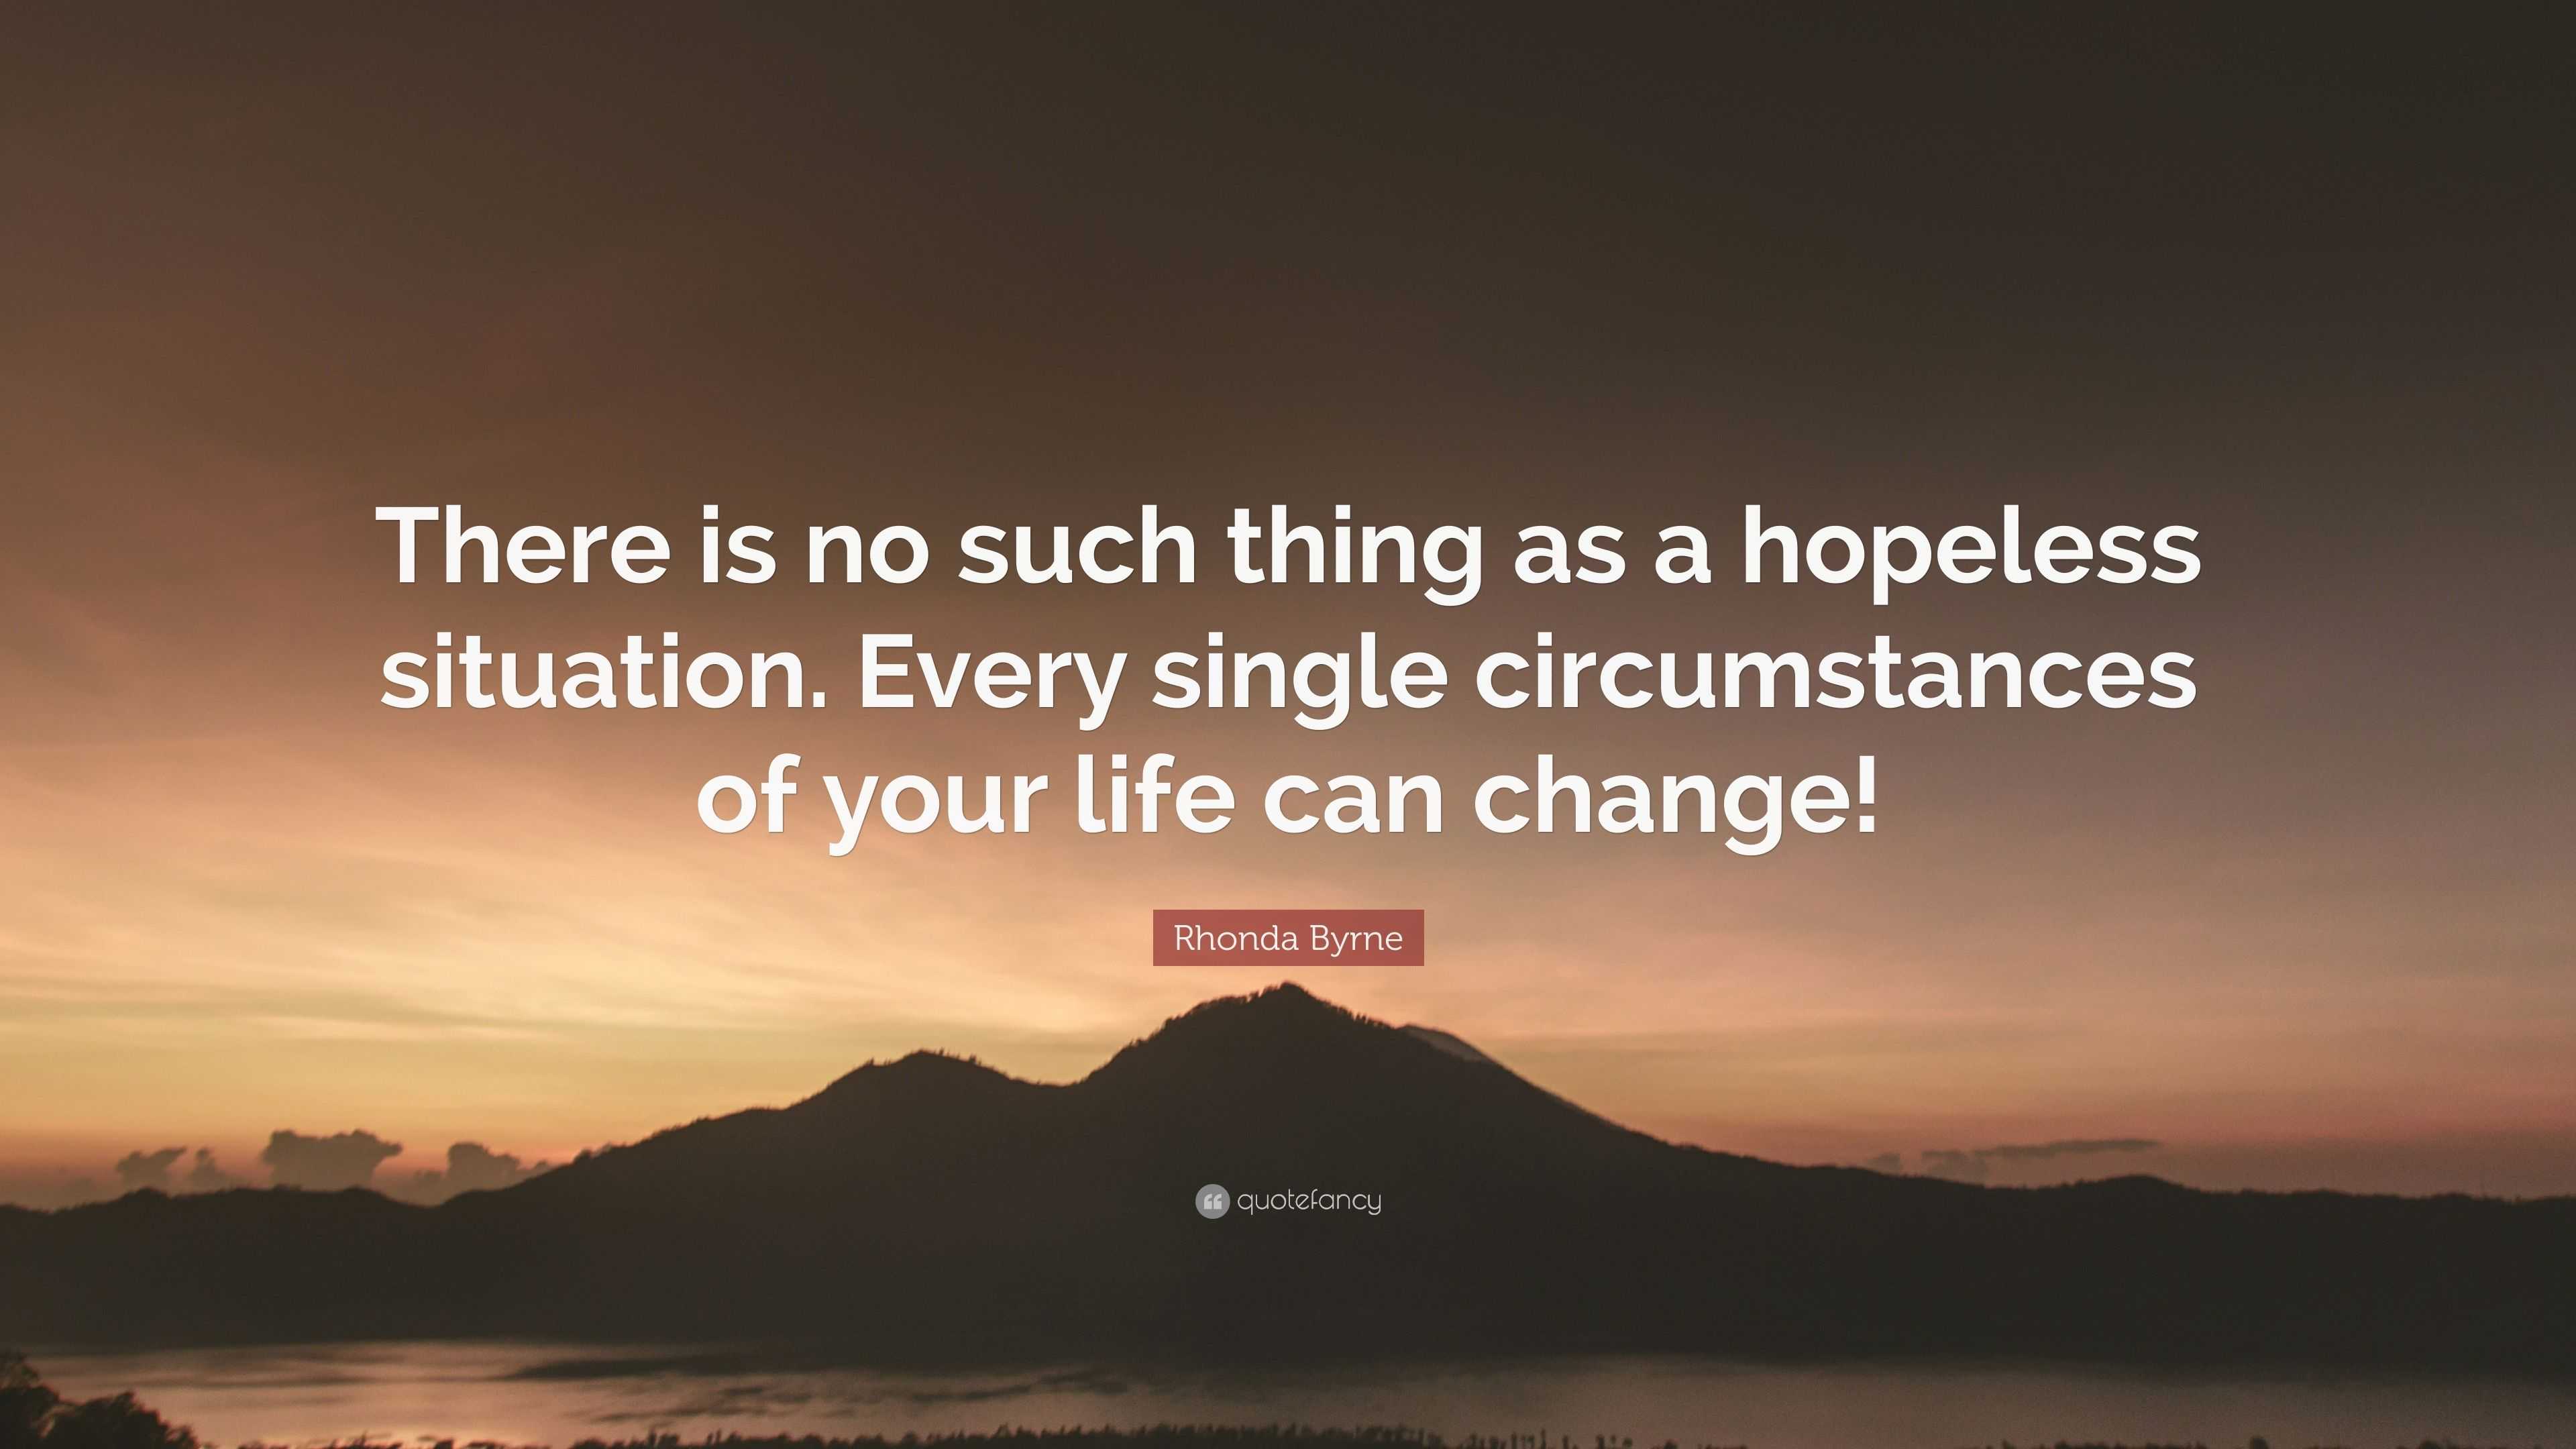 Rhonda Byrne Quote: “There is no such thing as a hopeless situation ...